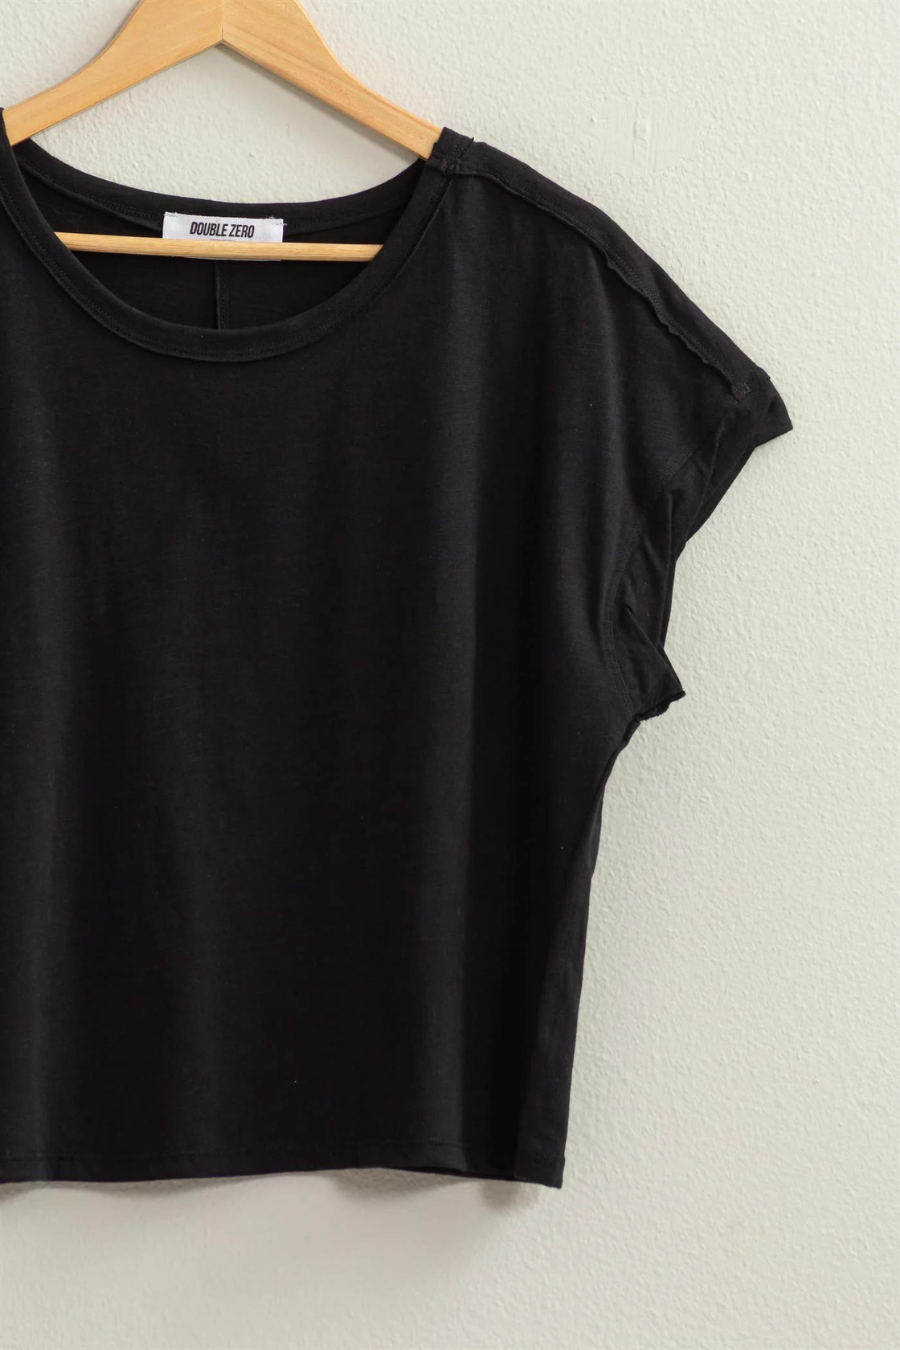 close up detail shot of Hunter raw edge tee in the color black,  shirt if hanging on a wooden hanger